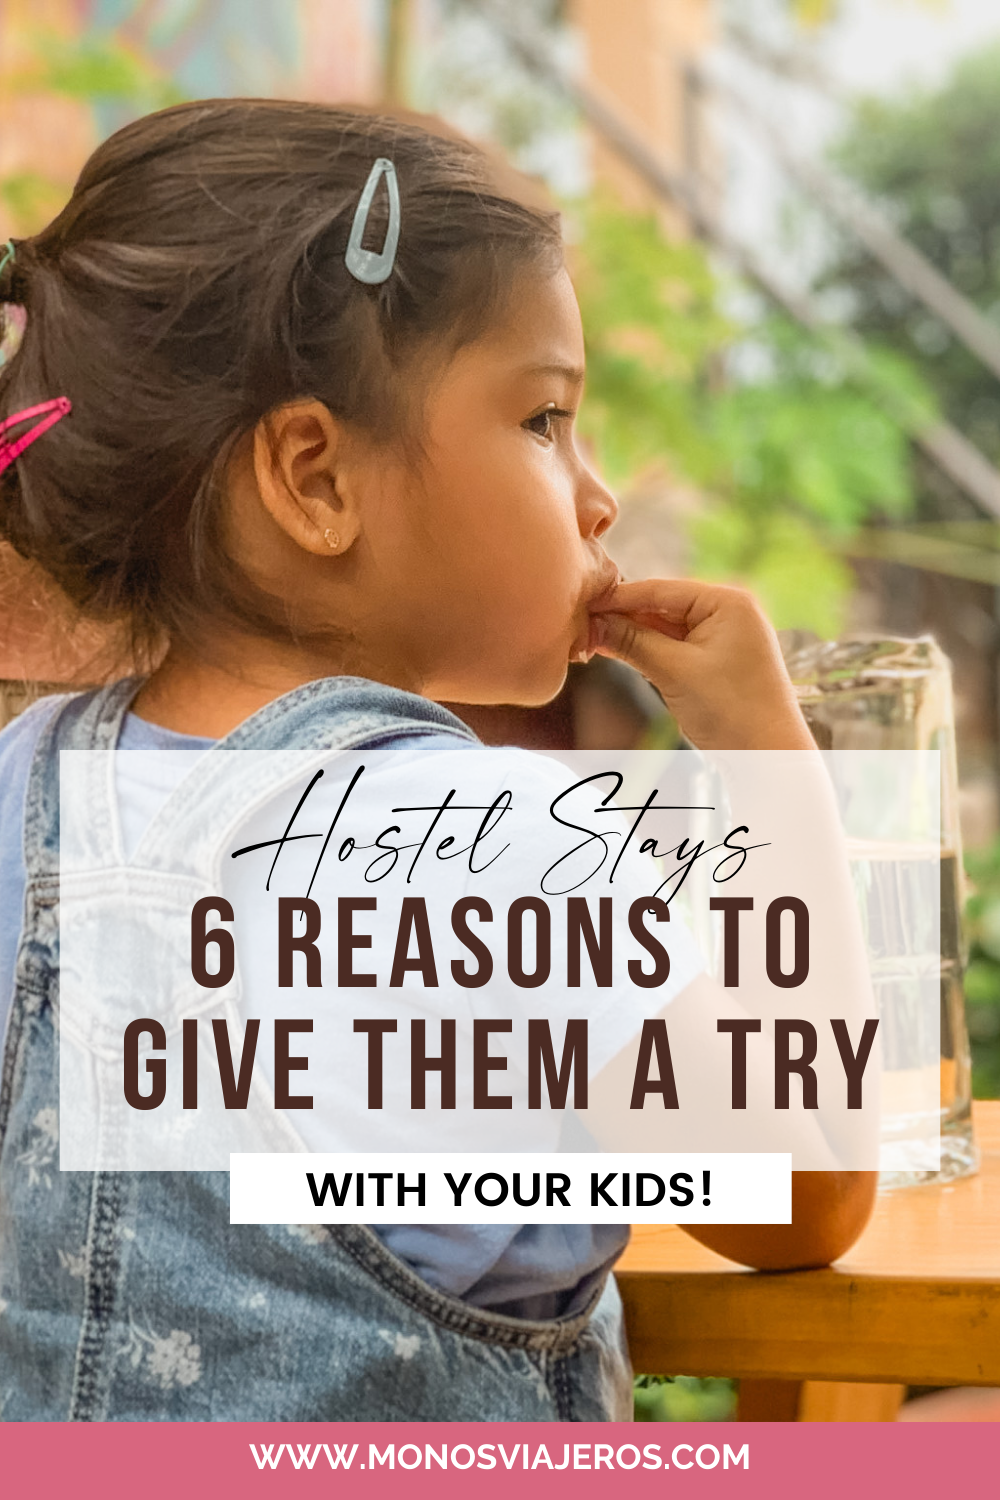 Hostel Stay with kids? 6 Reasons why you should try it. ⋆ monosviajeros.com